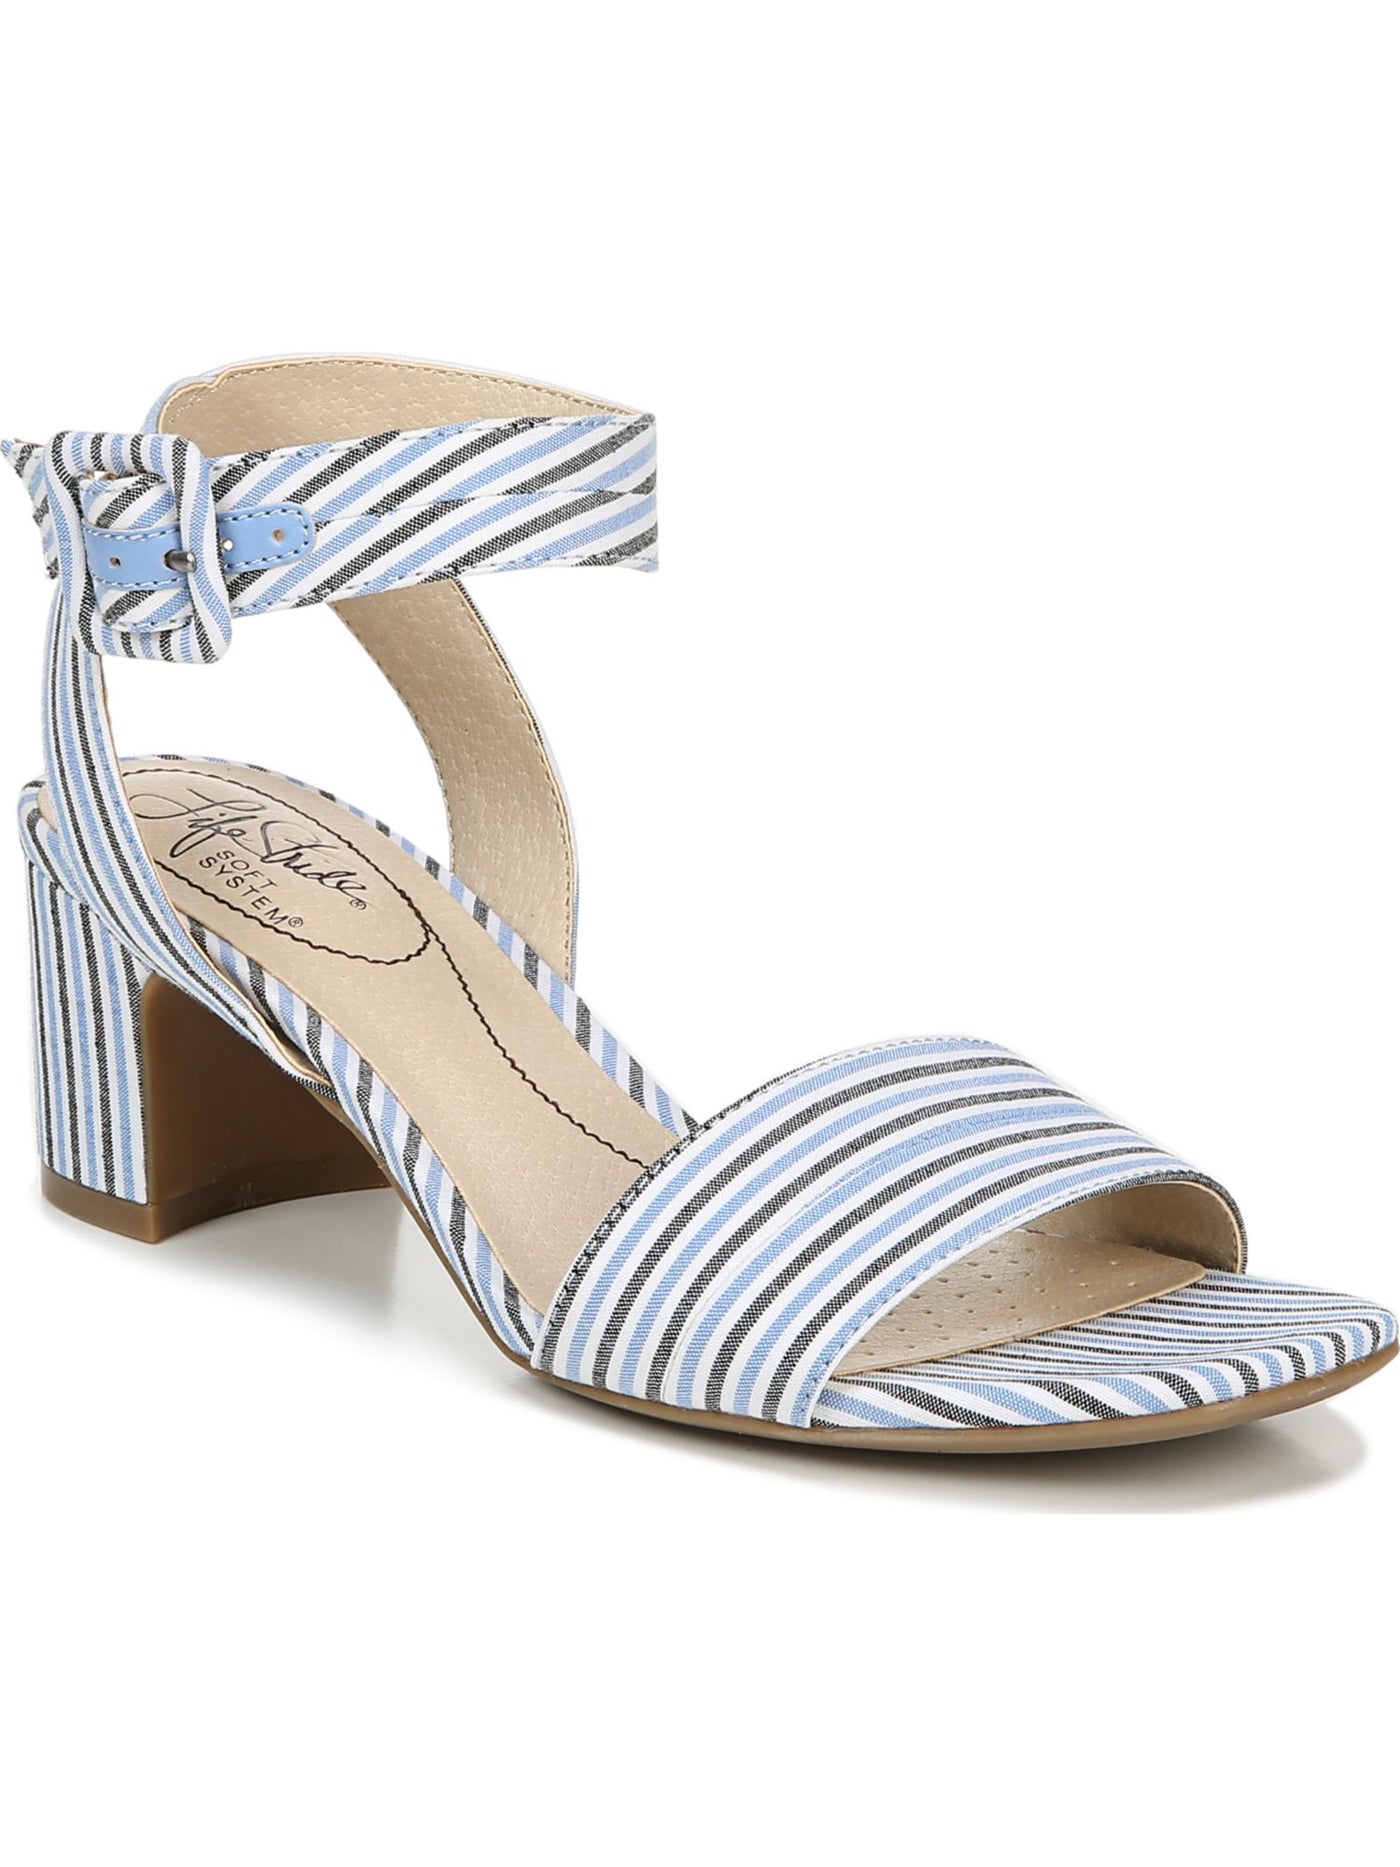 LIFE STRIDE Womens Light Blue Striped Ankle Strap Cushioned Carnival Round Toe Block Heel Buckle Dress Sandals Shoes 7 M